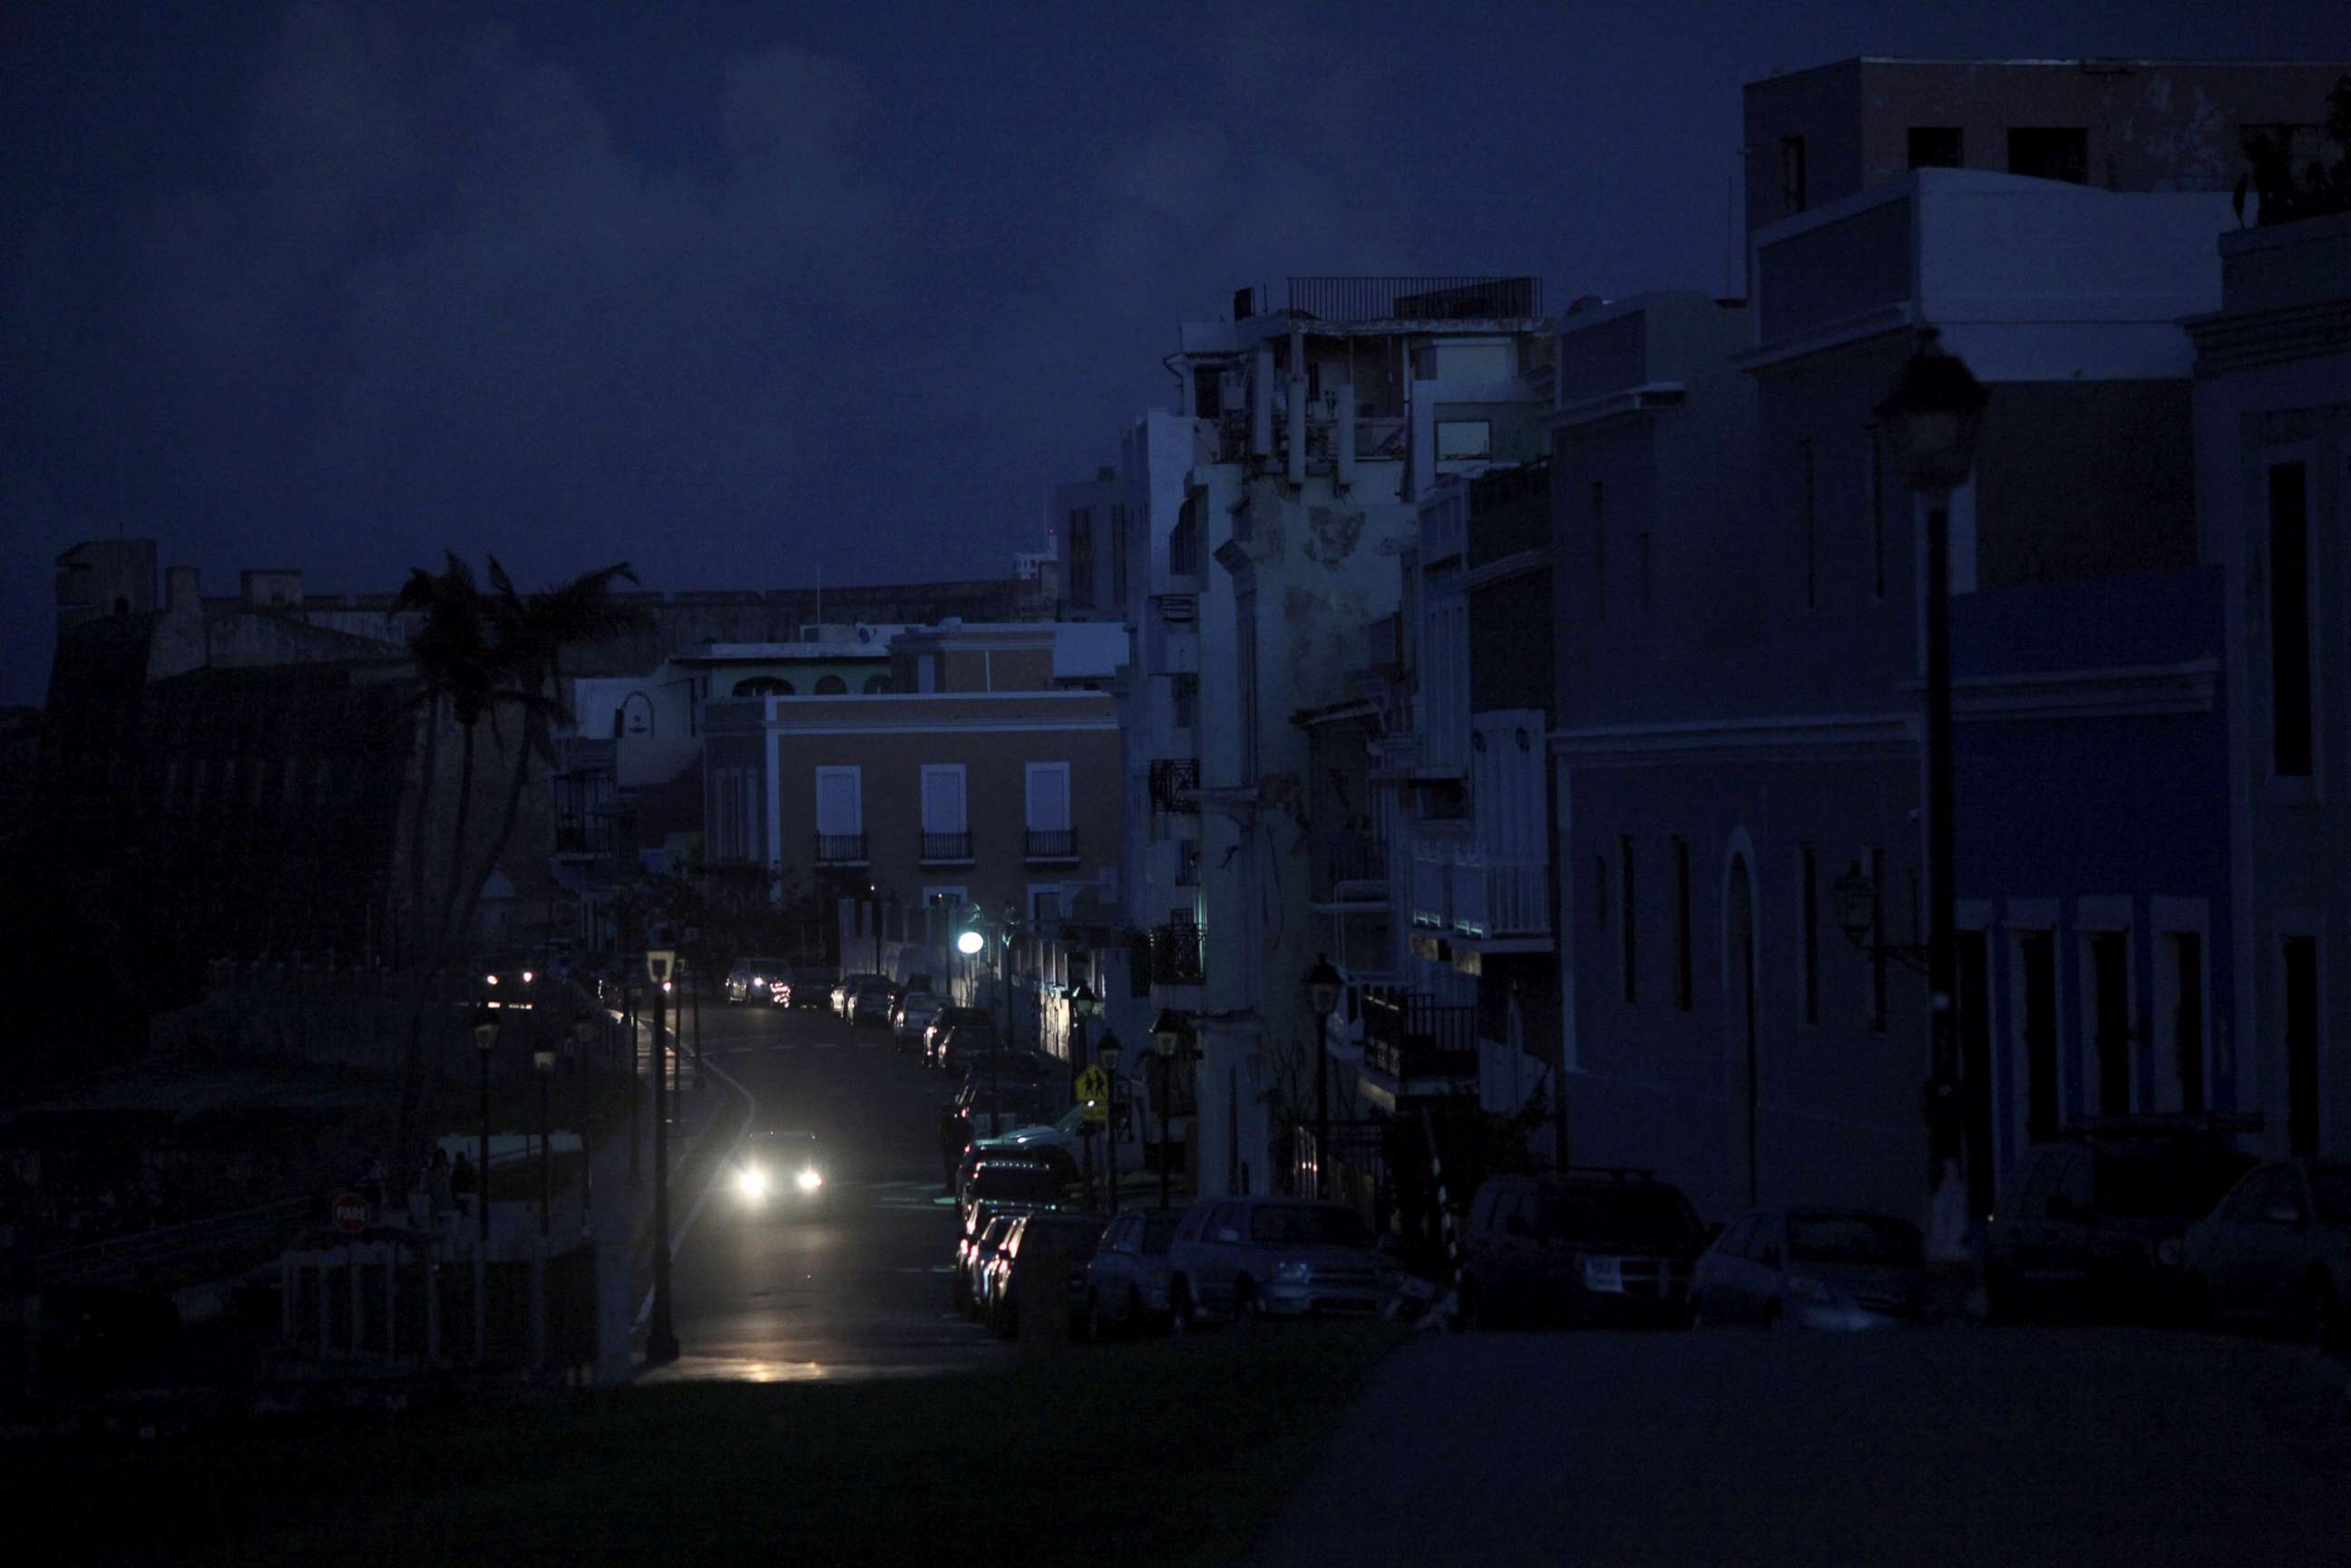 PHOTO: A car drives through a dark street in Old San Juan, Puerto Rico, Oct. 26, 2017, after Hurricane Maria hit the island and damaged the power grid in September.